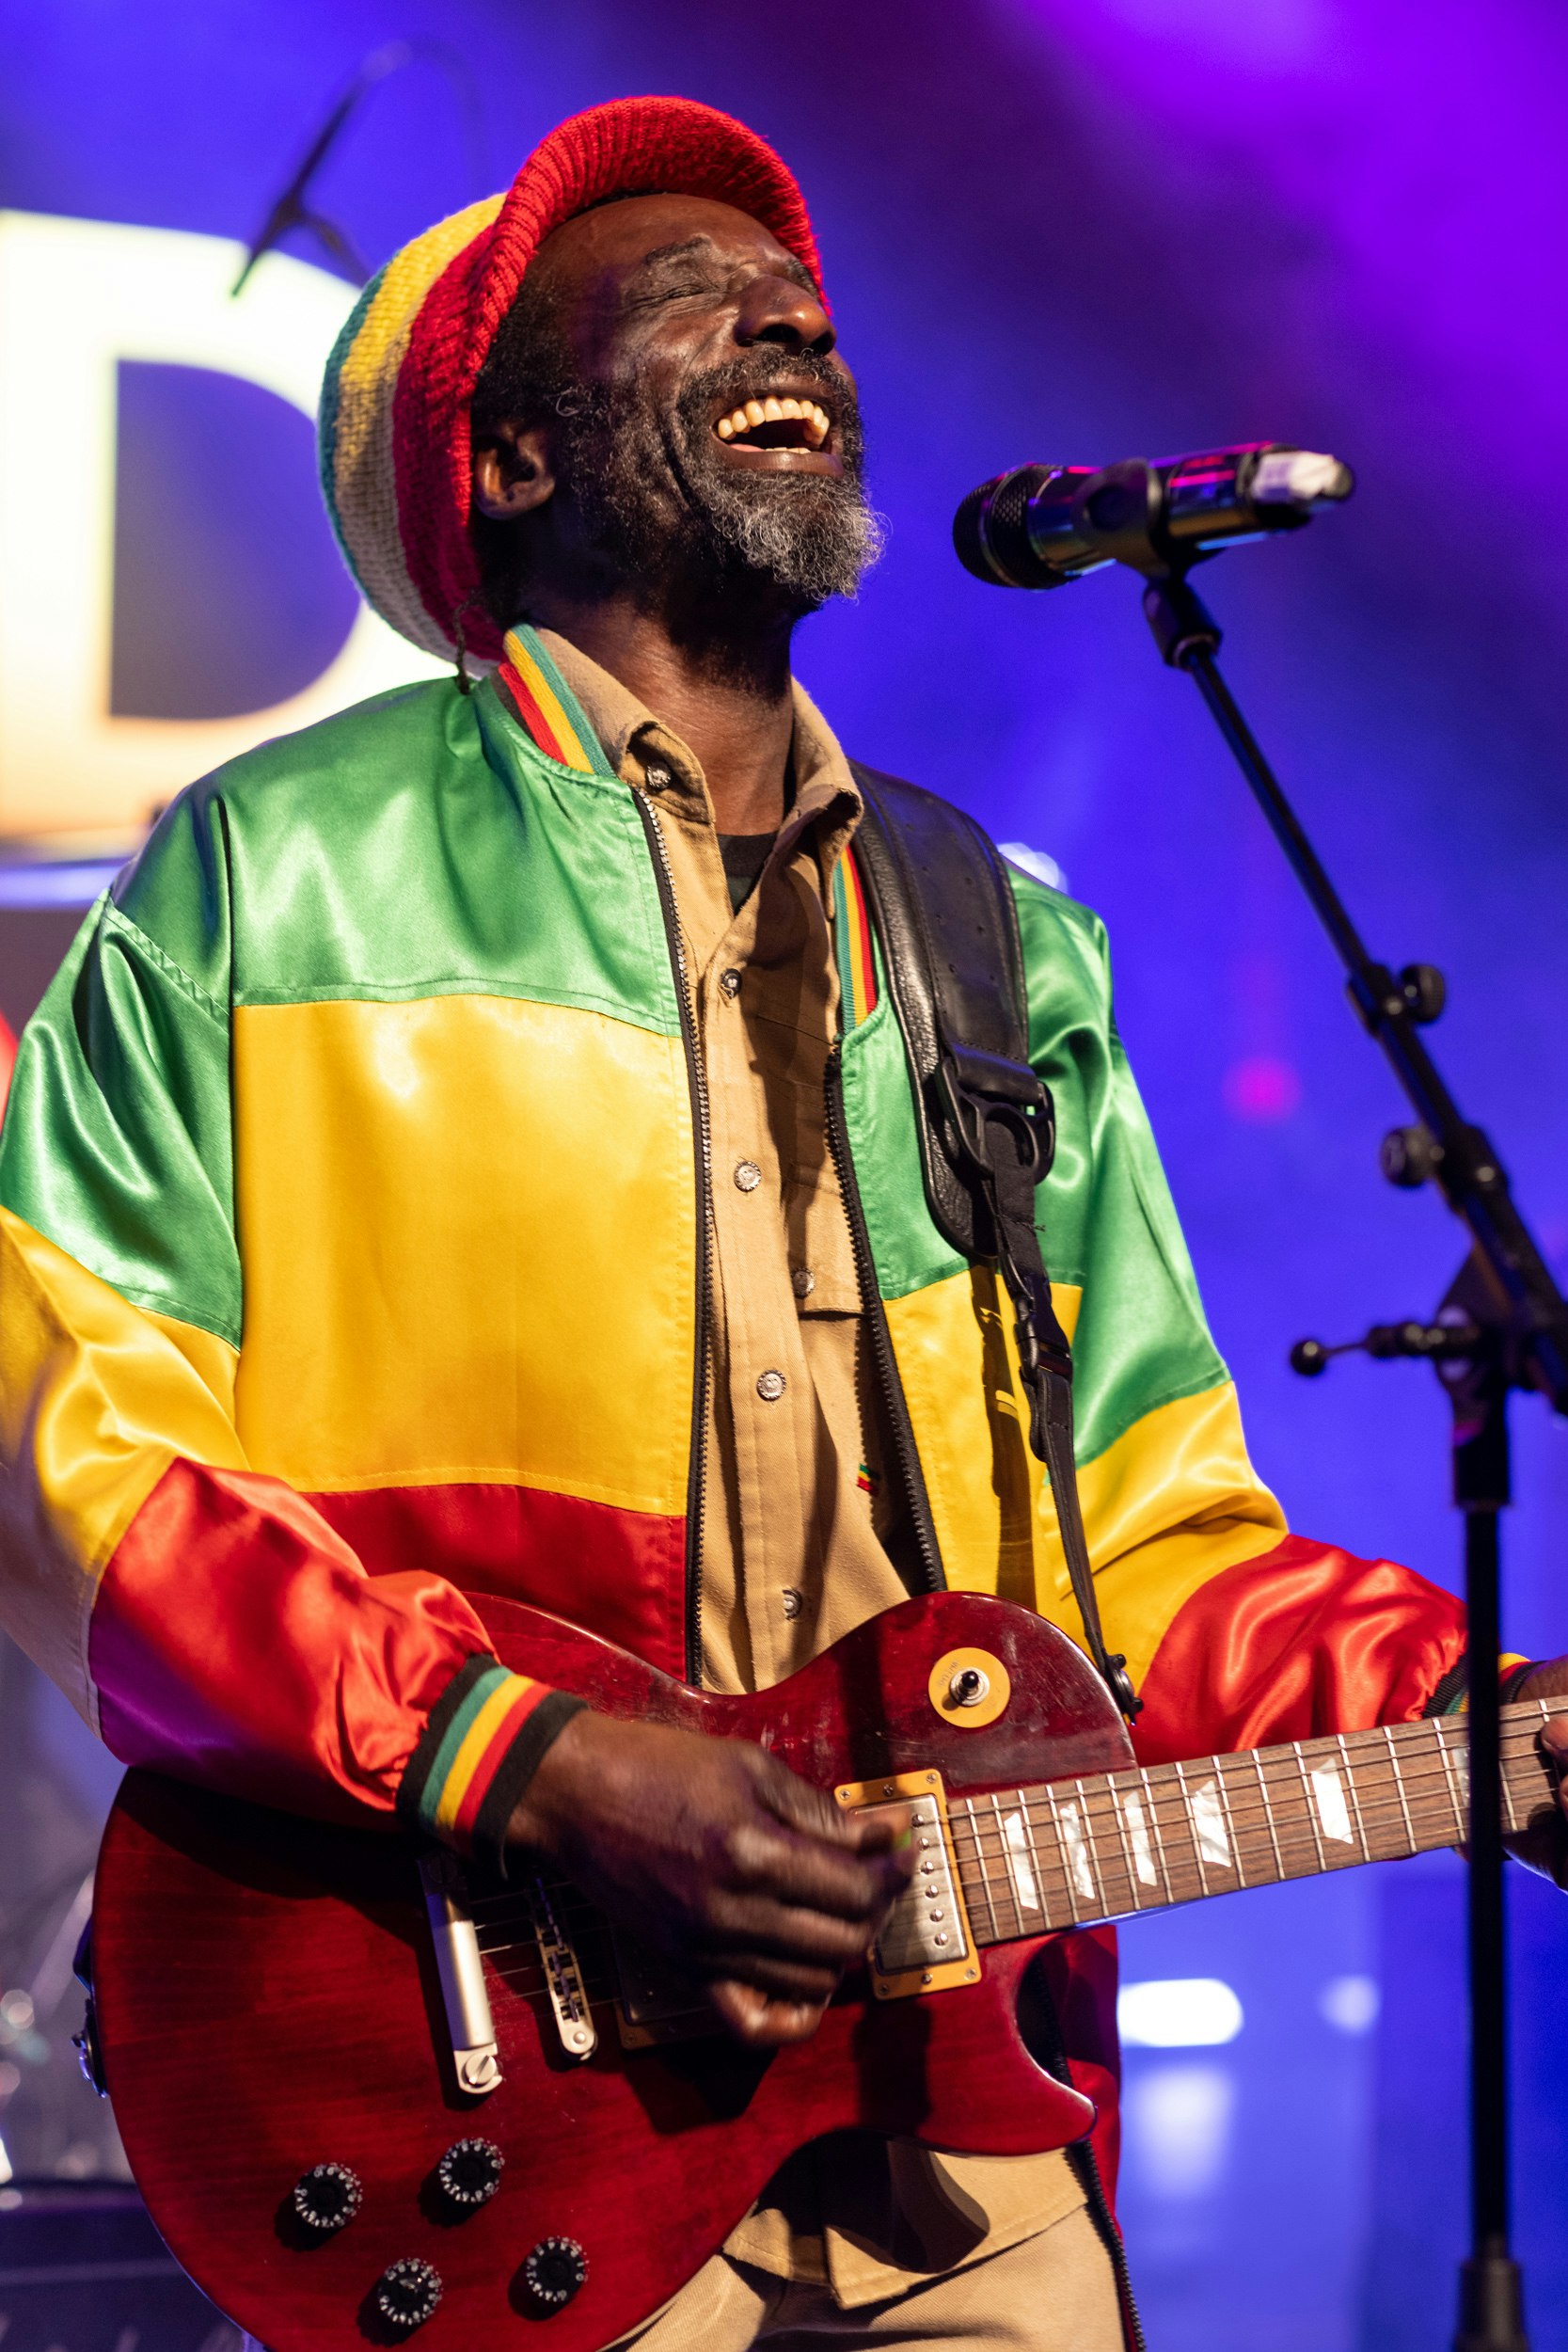 A close up shot of a Bob Marley tribute singer. He wears a red, gold and green jacket and knitted hat and holdds a red guitar. His eyes are closed, smiling while singing into the microphone.